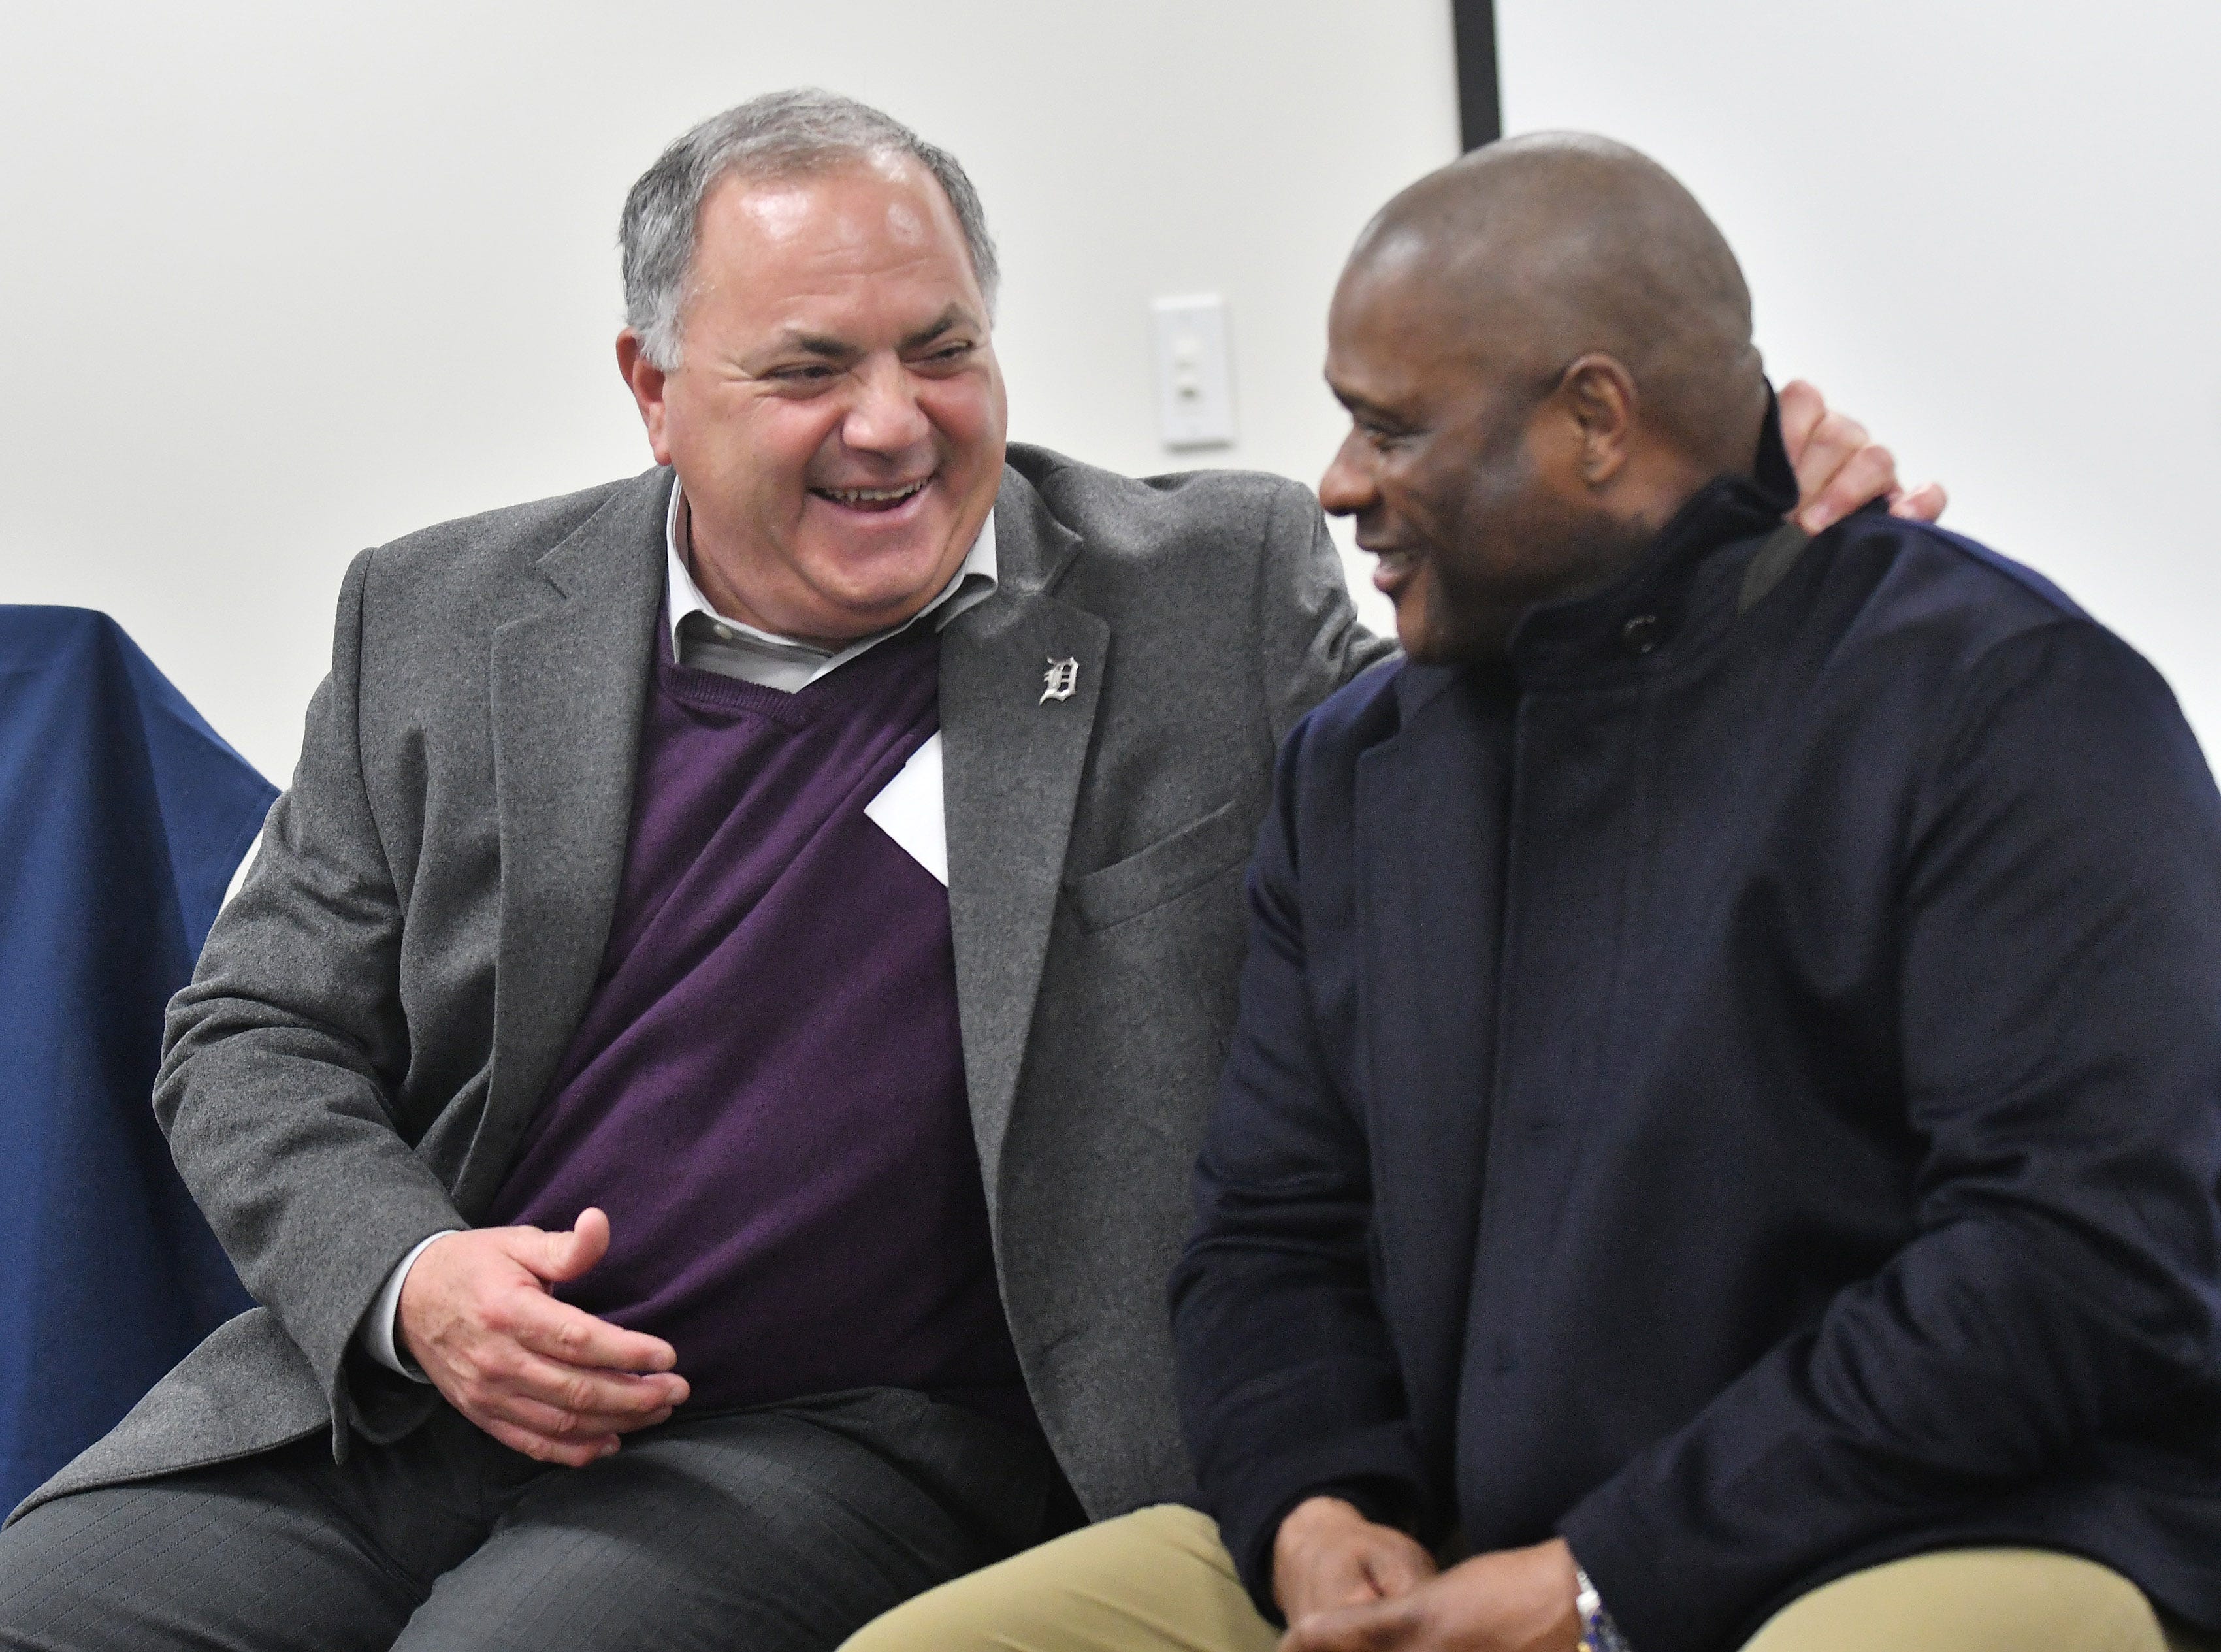 Tigers executive vice president of baseball operations and general manager Al Avila talks with hitting coach Lloyd McClendon, right, during a stop on the 2019 Detroit Tigers Winter Caravan at the John D. Dingell VA Medical Center in Detroit on Jan. 24, 2019.